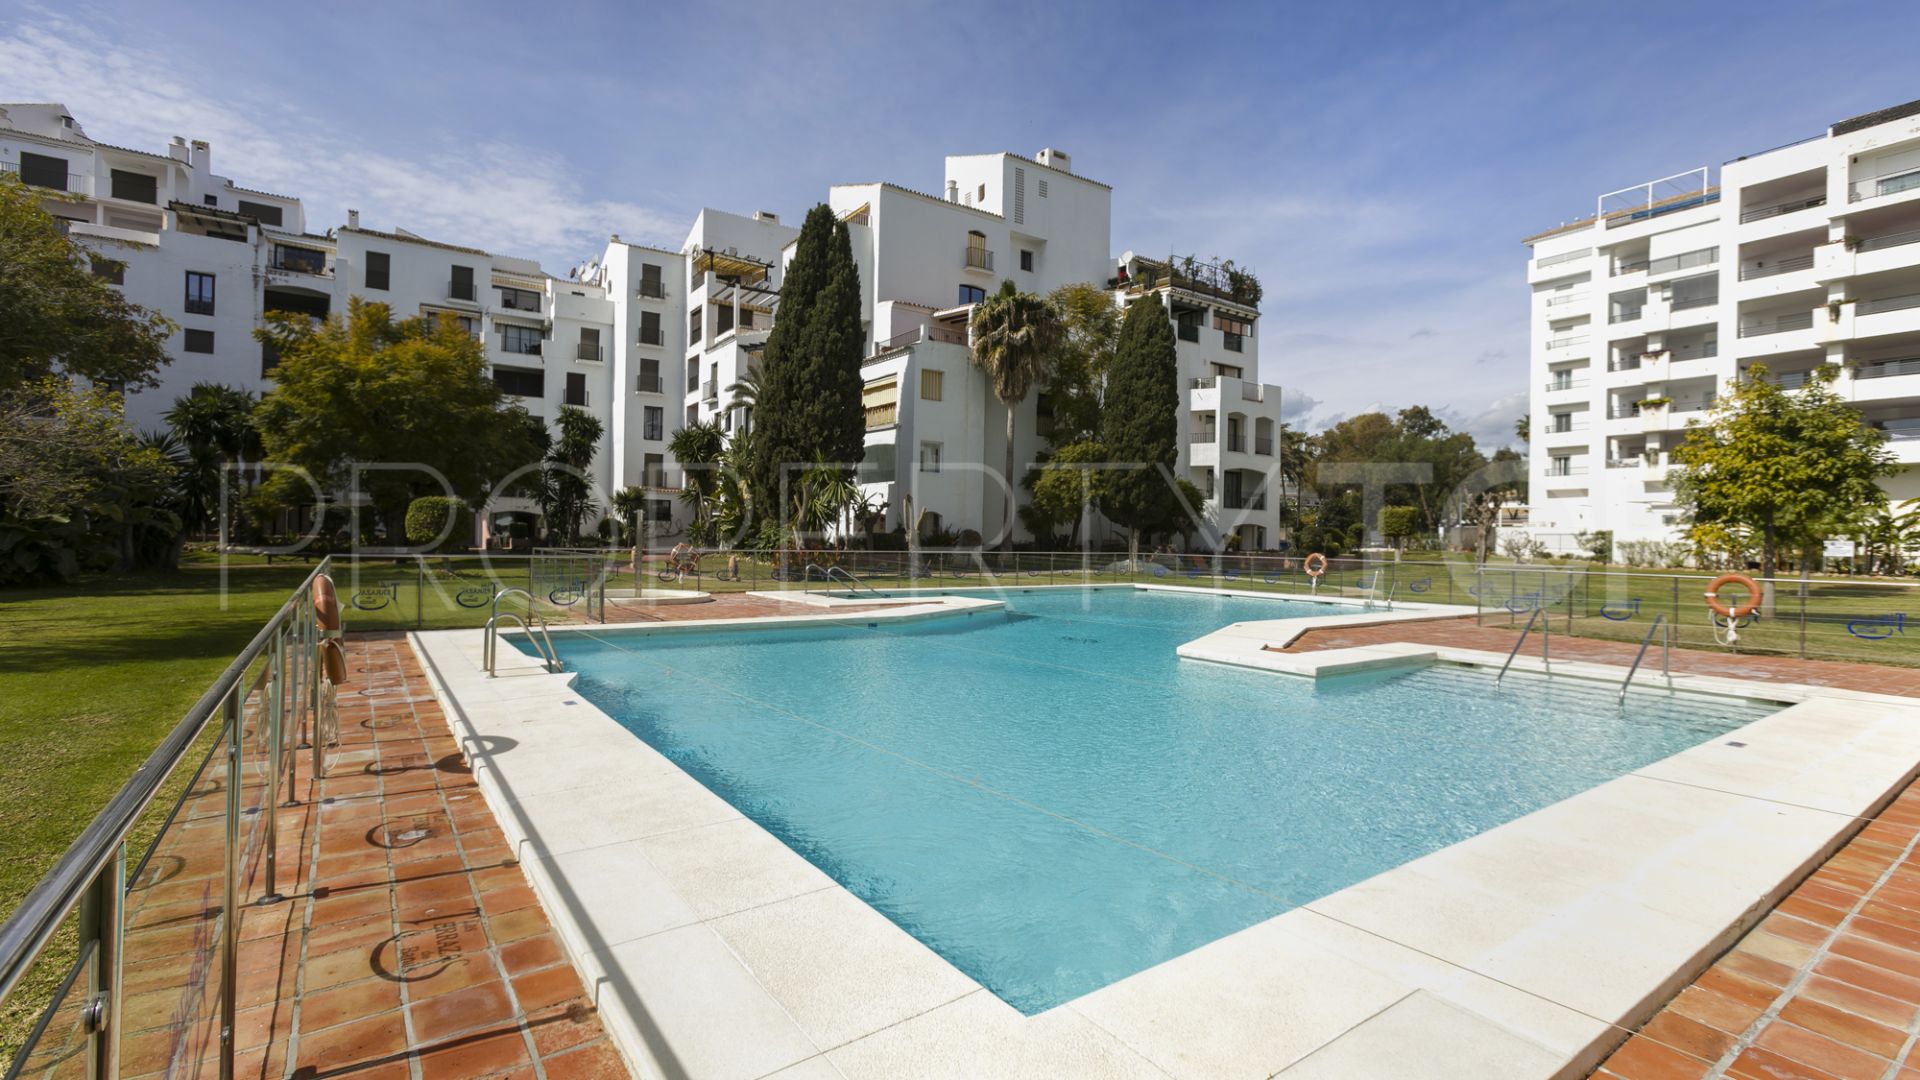 Apartment with 1 bedroom for sale in Marbella - Puerto Banus